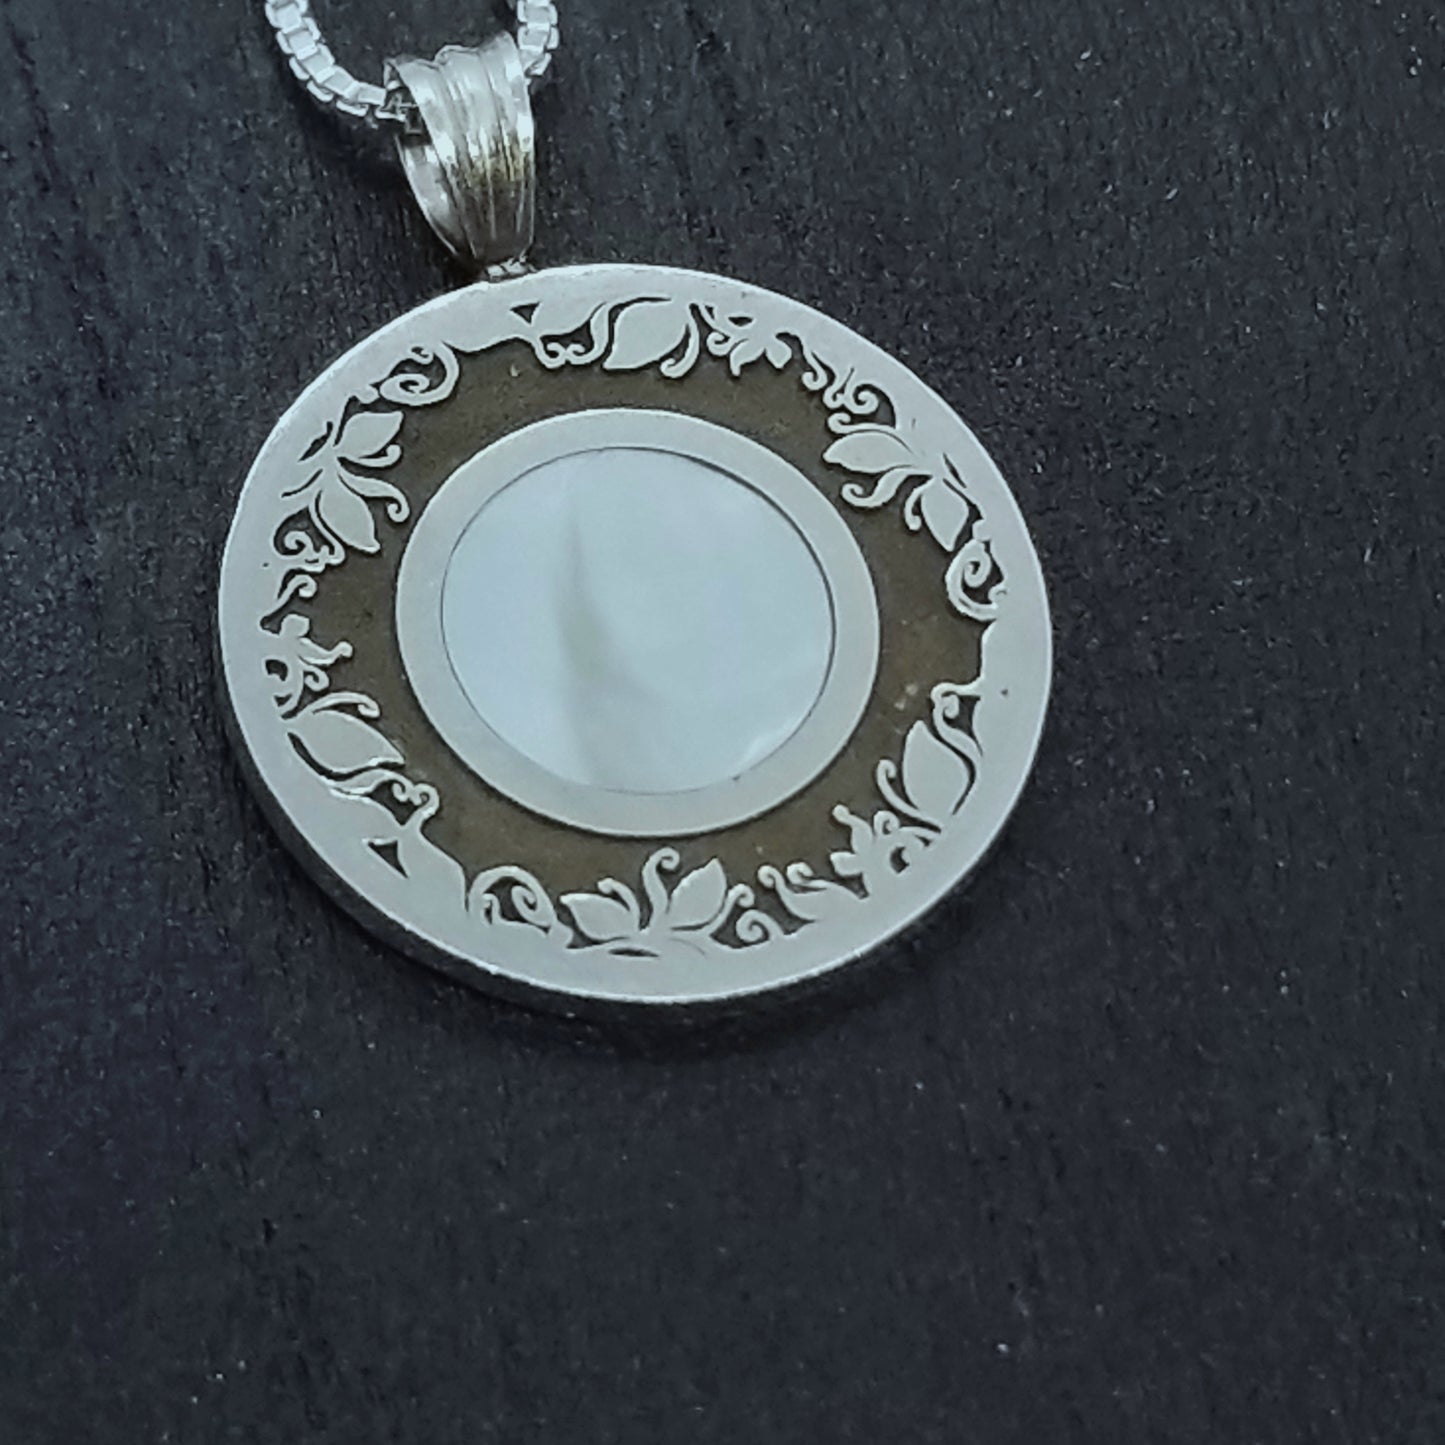 Wreath of Vines Sterling Silver Pendant with Inlay